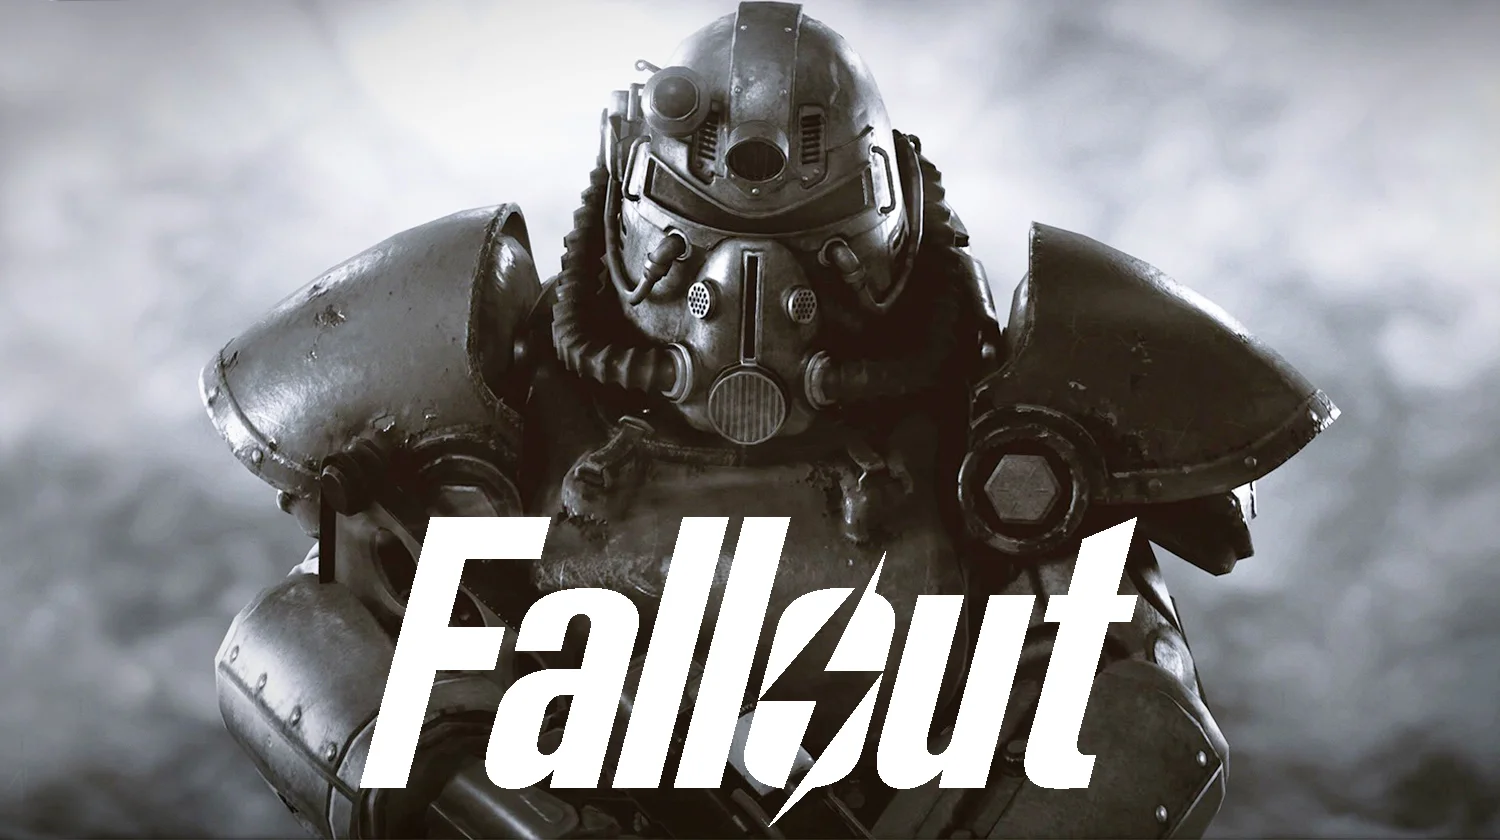 Filming footage from Amazon's Fallout series shown